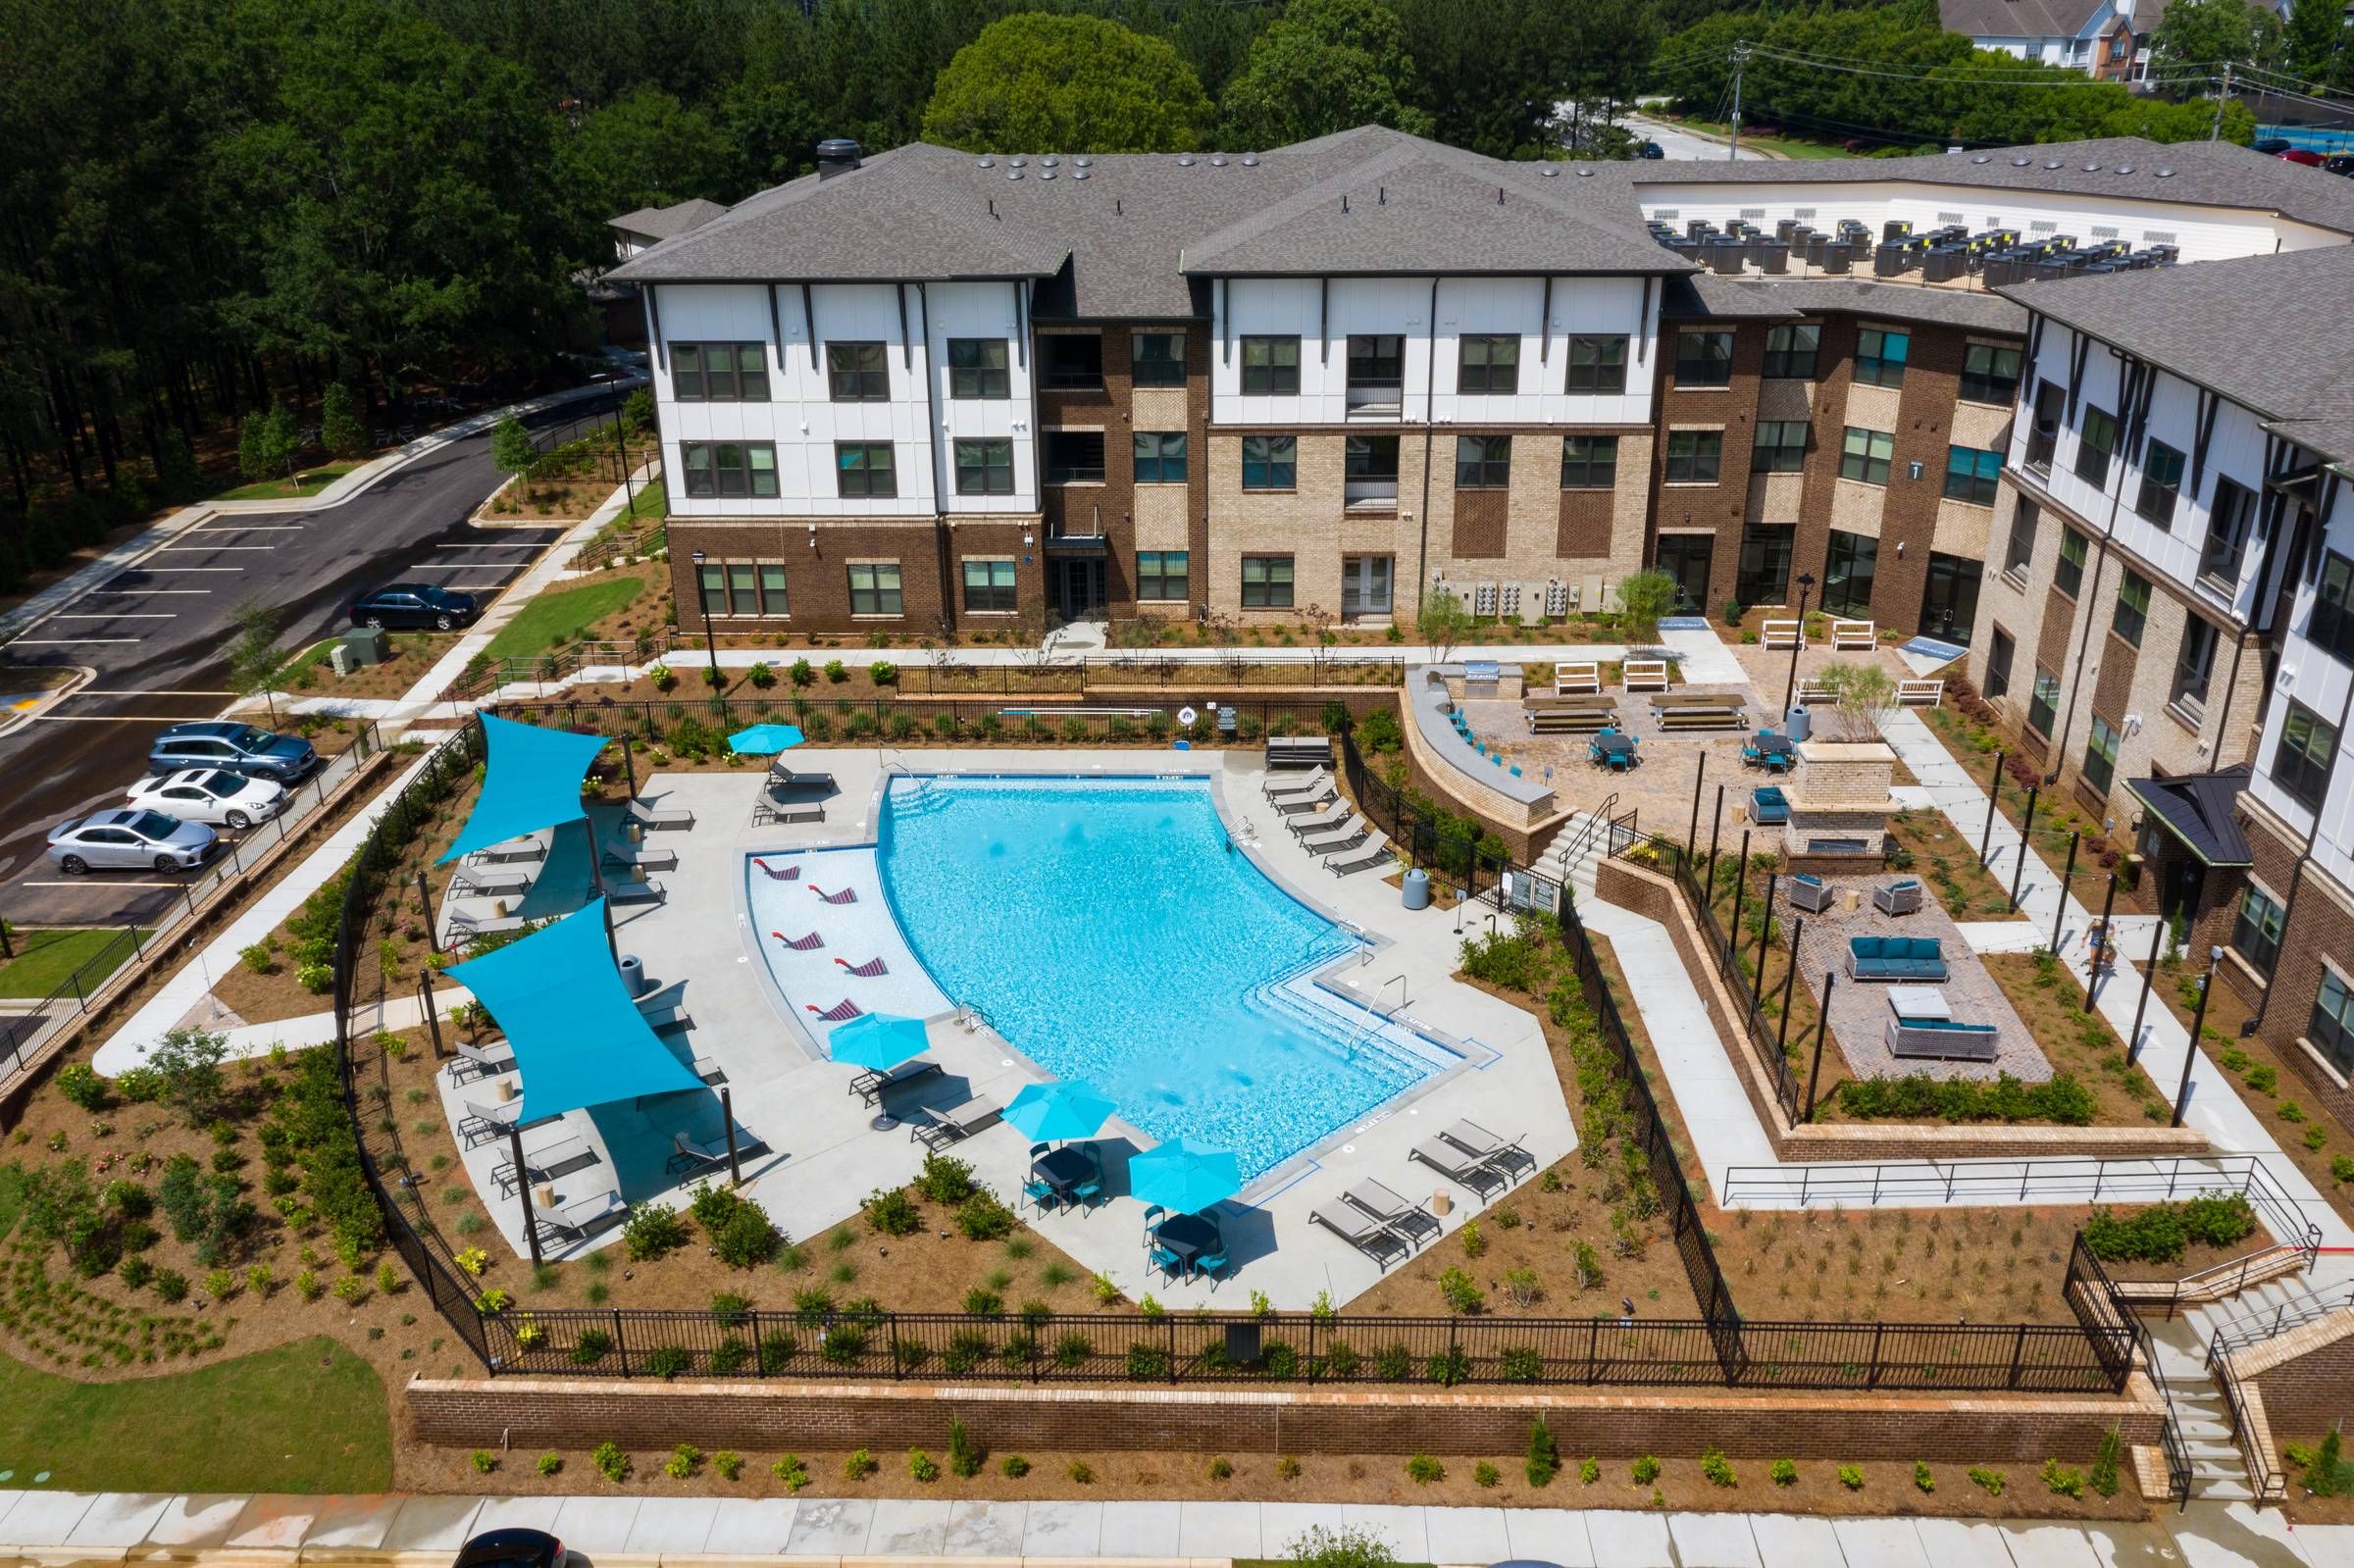 Overhead view of Alta Sugarloaf's community pool area flanked by apartment buildings, featuring aqua blue water and well-arranged patio furniture.